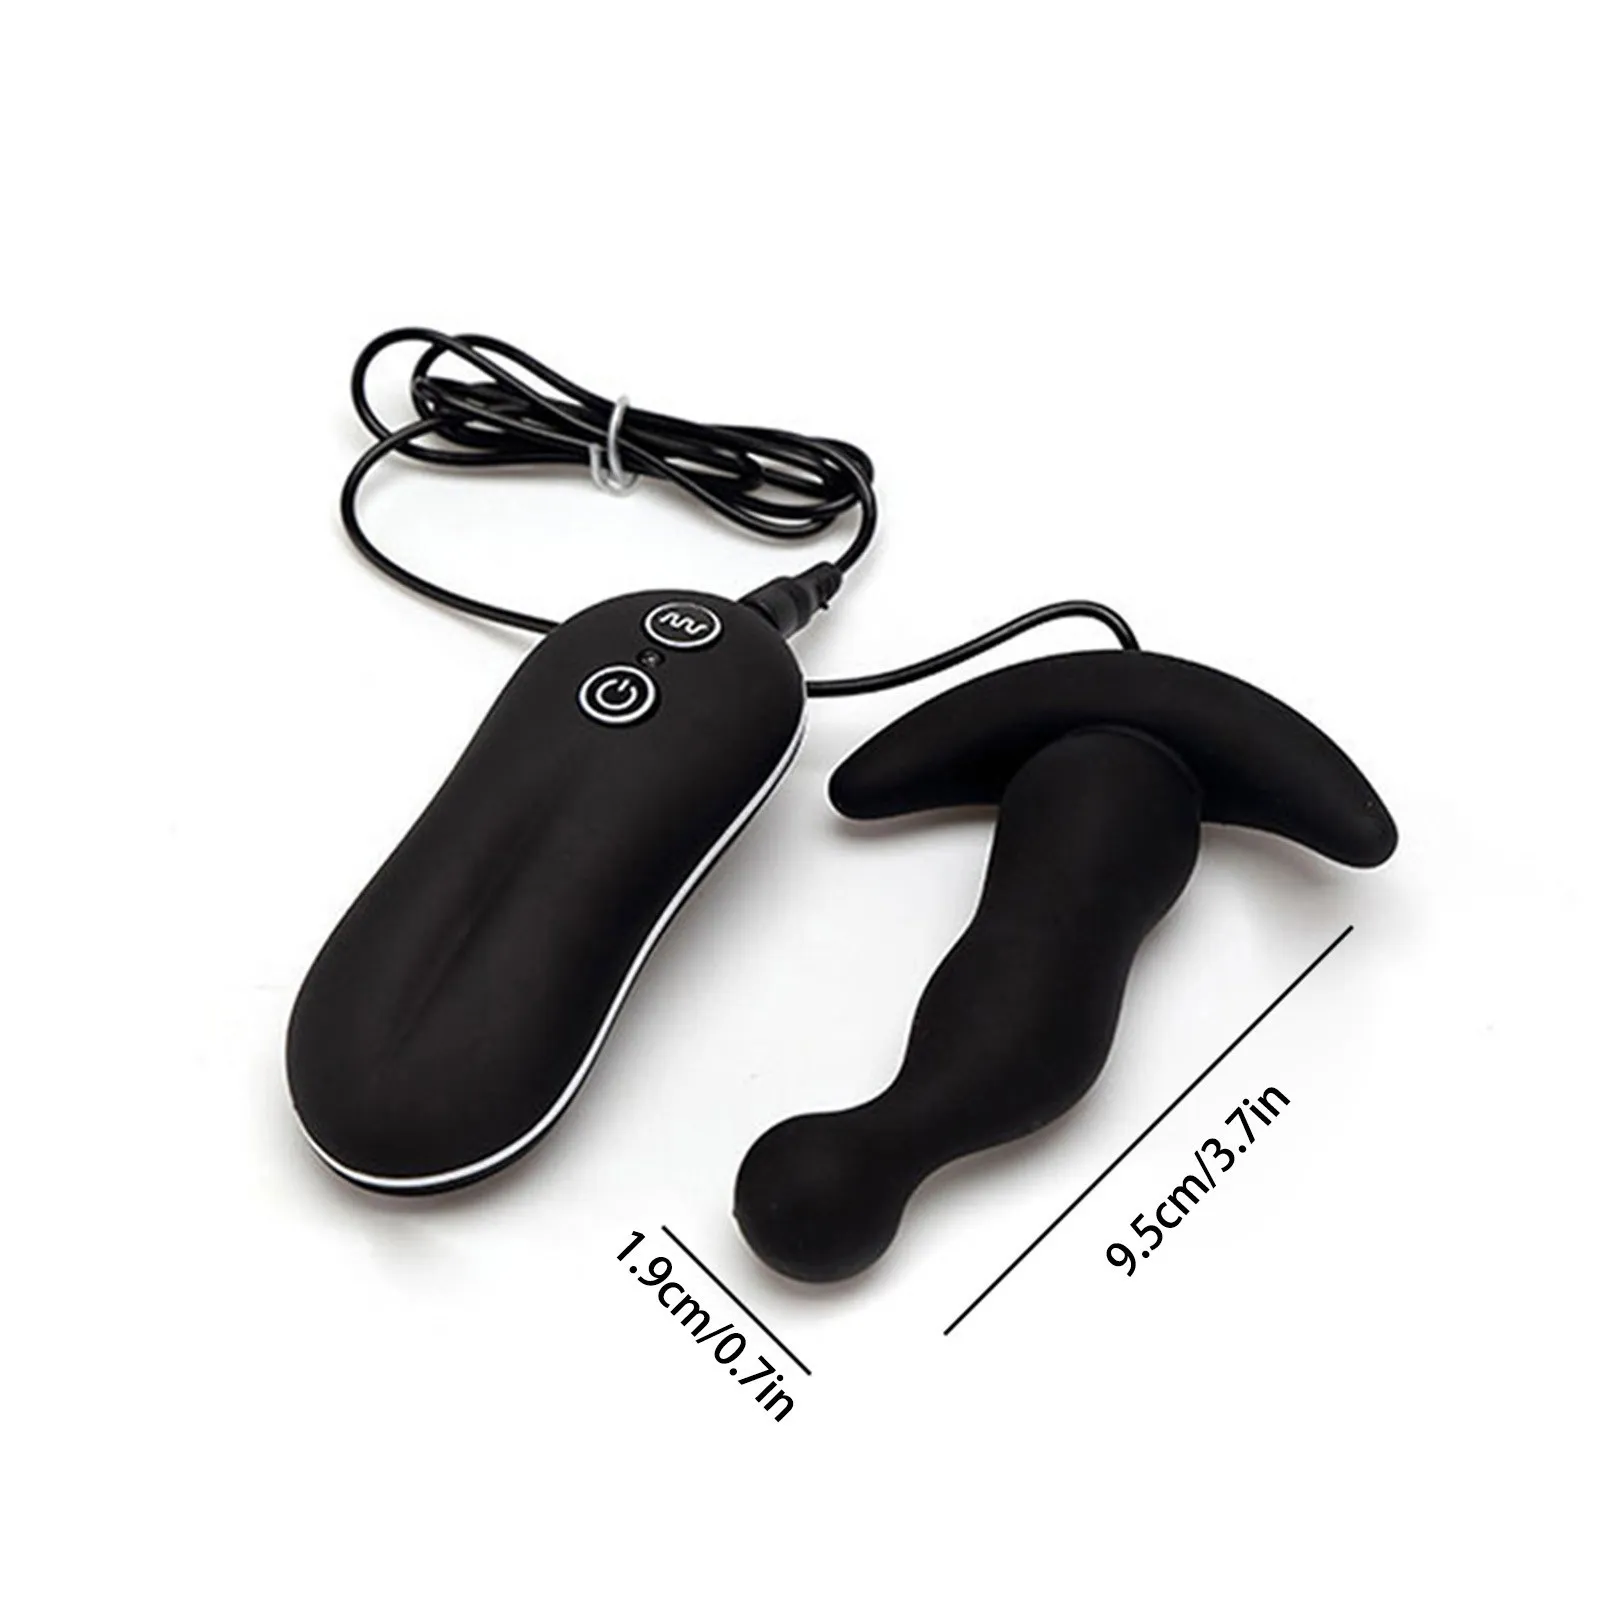 sexy Toys For Men Prostate Massager Vibrator Butt Plug Anal Tail Rotating Wireless Remote Usb Charging Adult Products Women